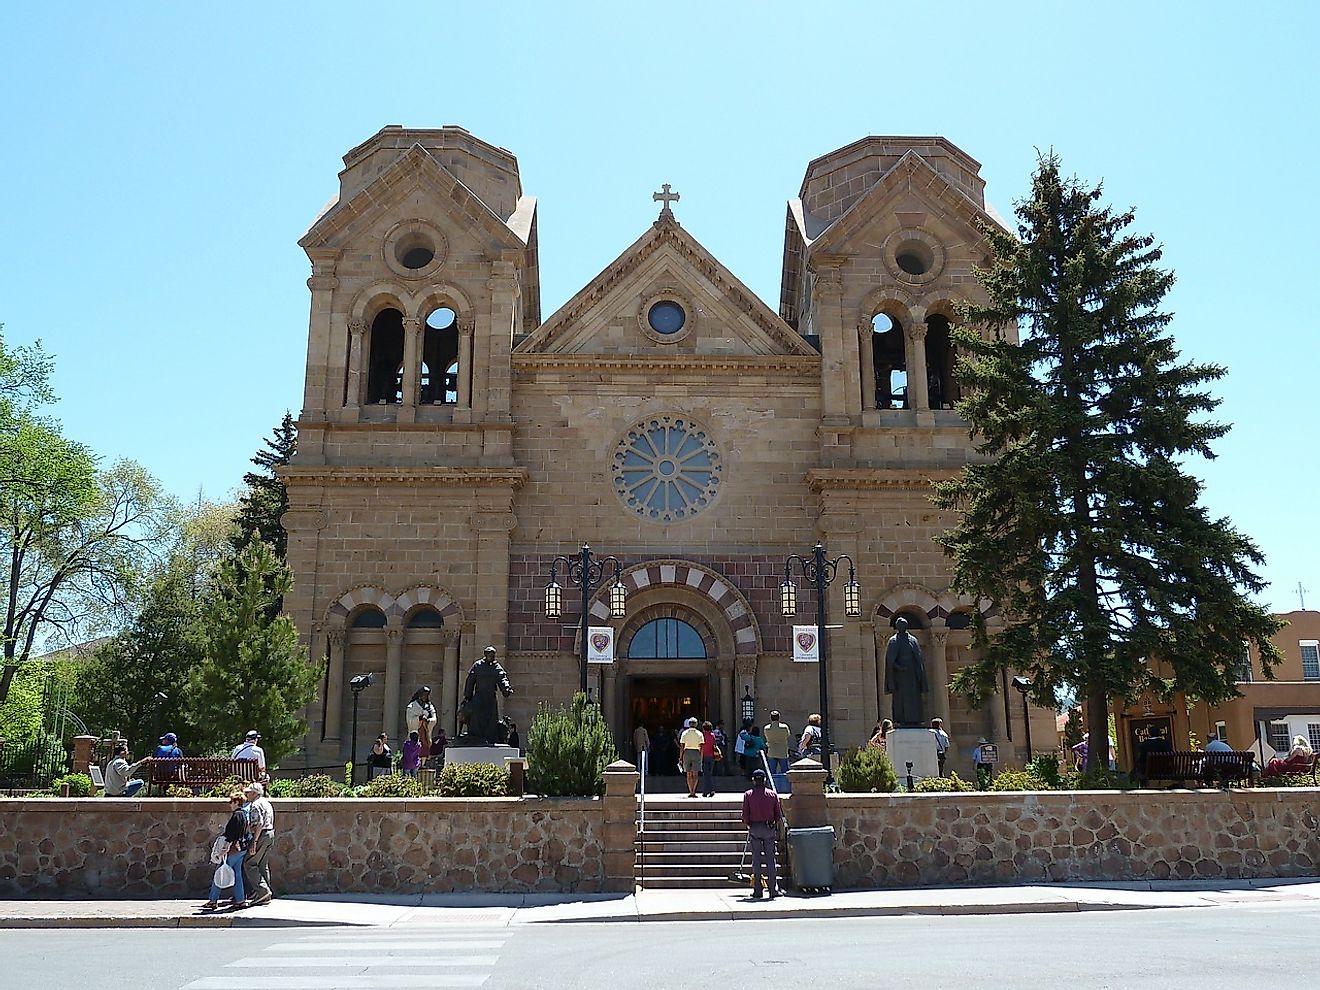 A cathedral in Santa Fe. Image credit: ArtTower from Pixabay 